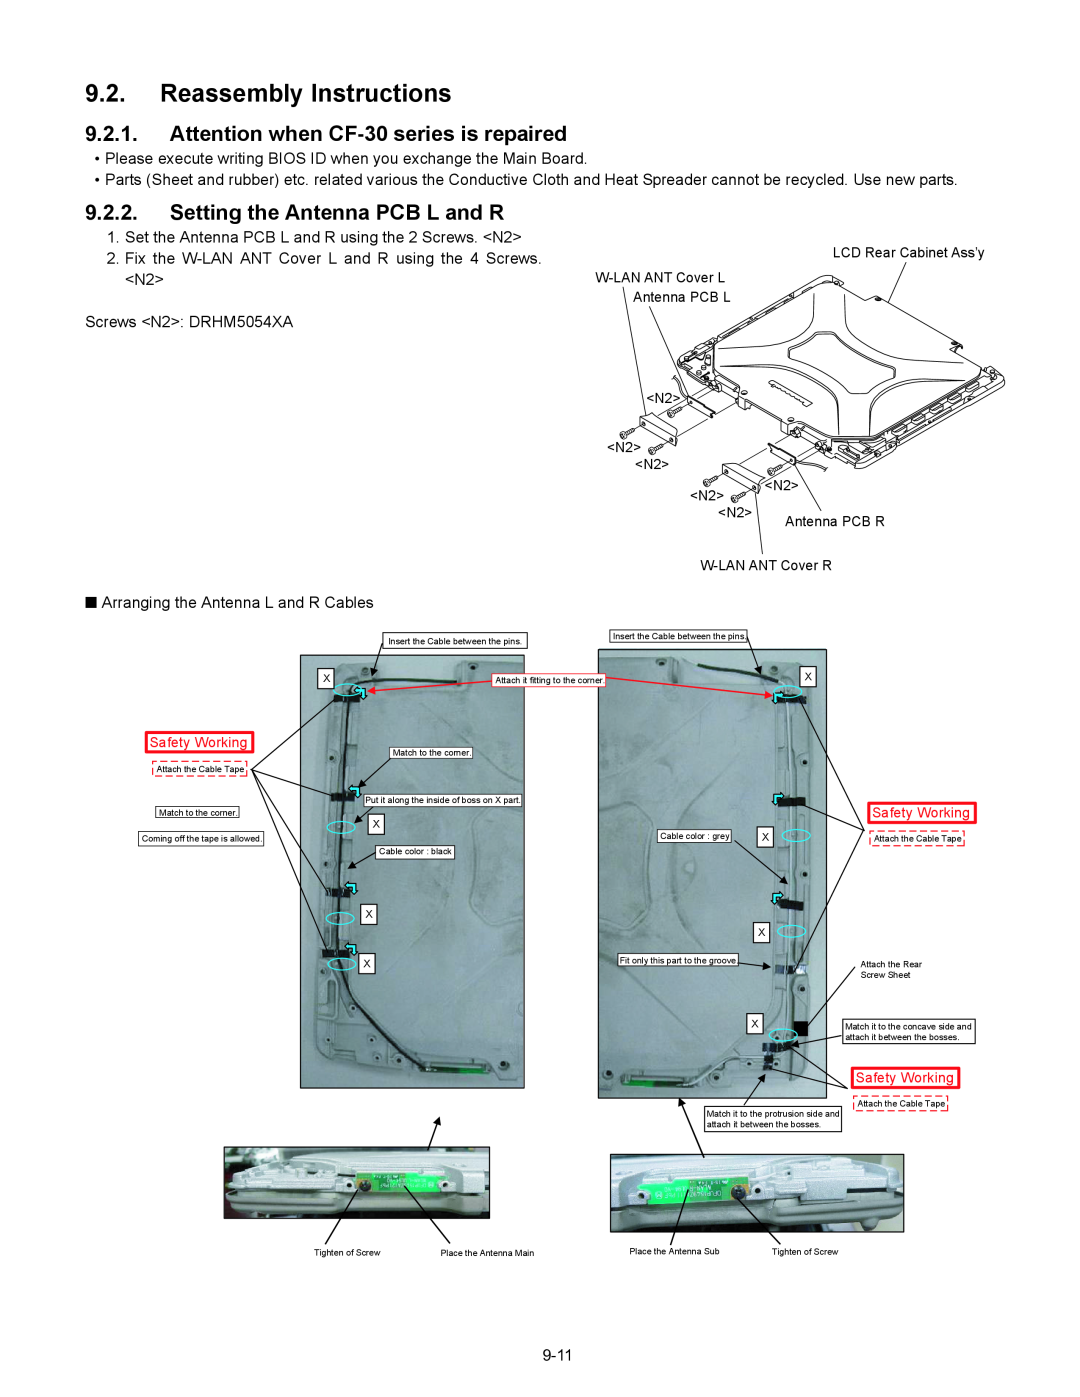 Matsushita Reassembly Instructions, Attention when CF-30 series is repaired, Setting the Antenna PCB L and R 